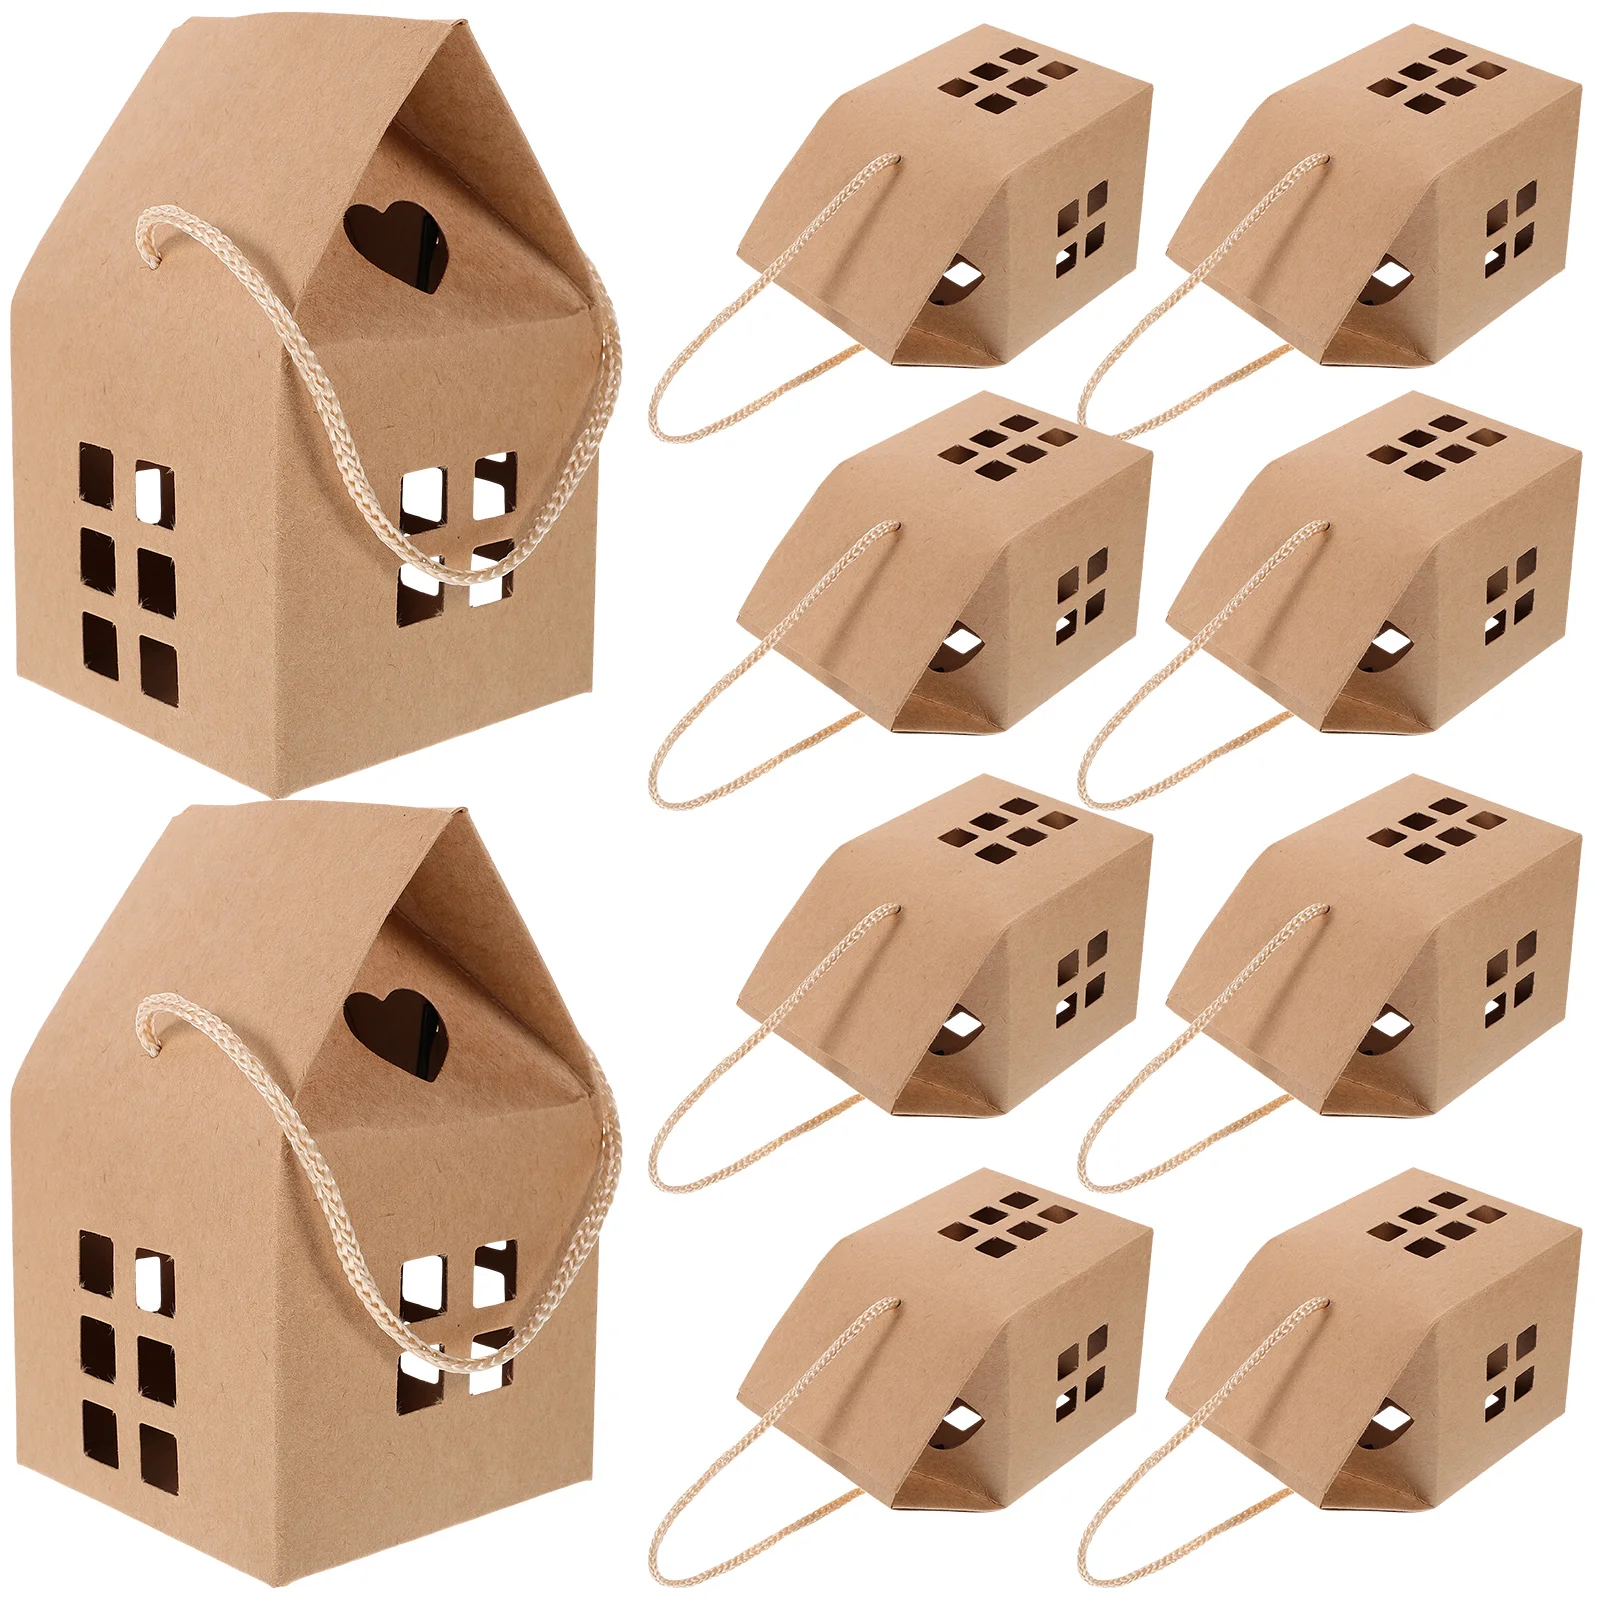 

15Pcs House Shaped Paper Boxes Handheld Present Bags Multi-function Candy Boxes